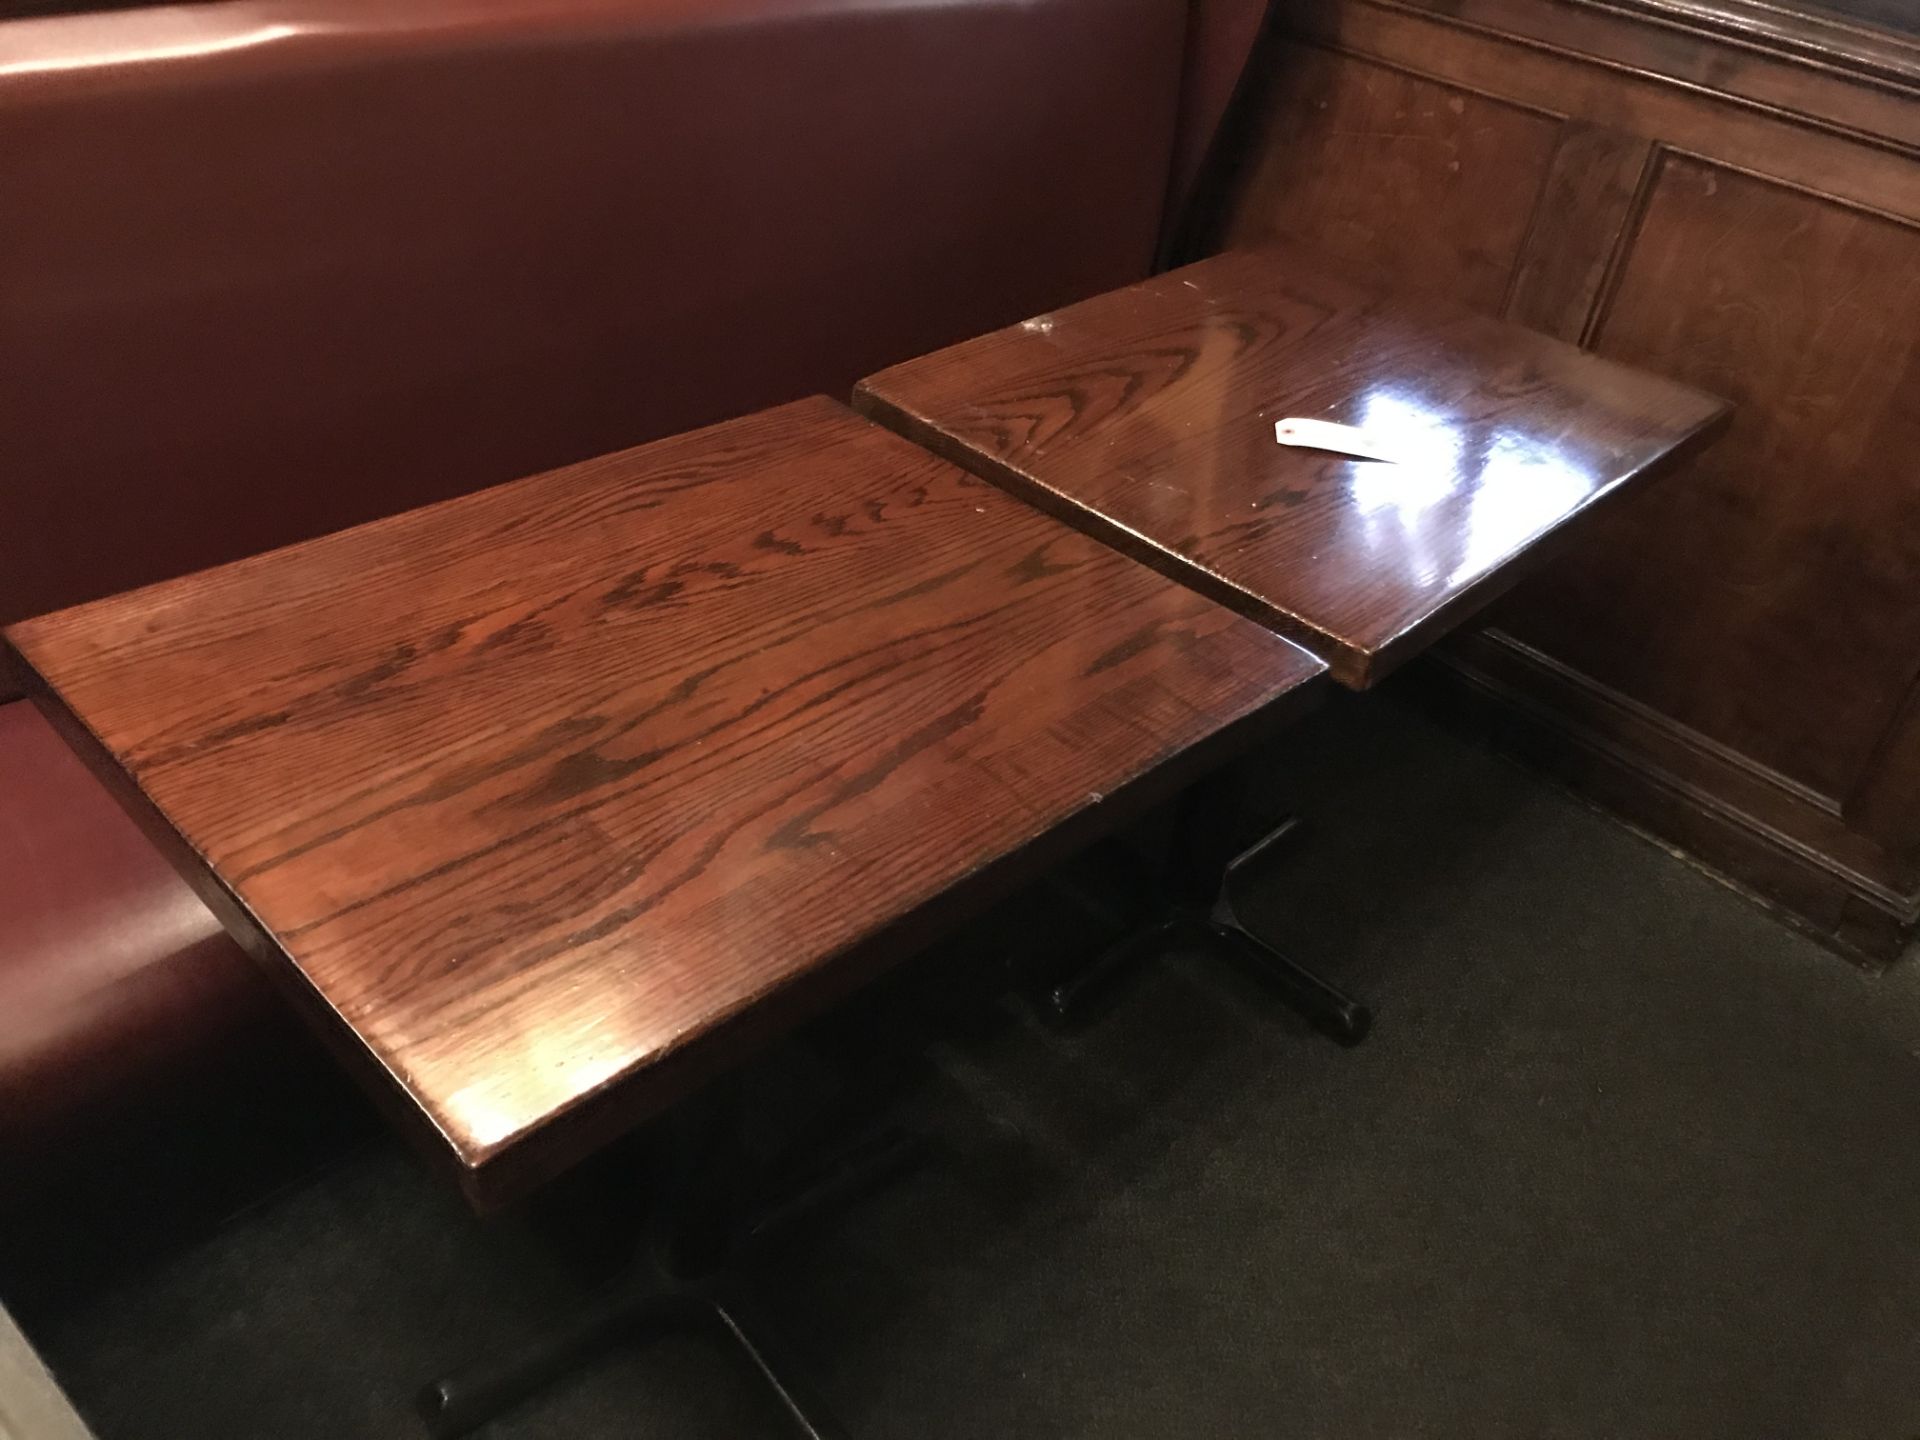 (3) 24x30" Wood Top Tables